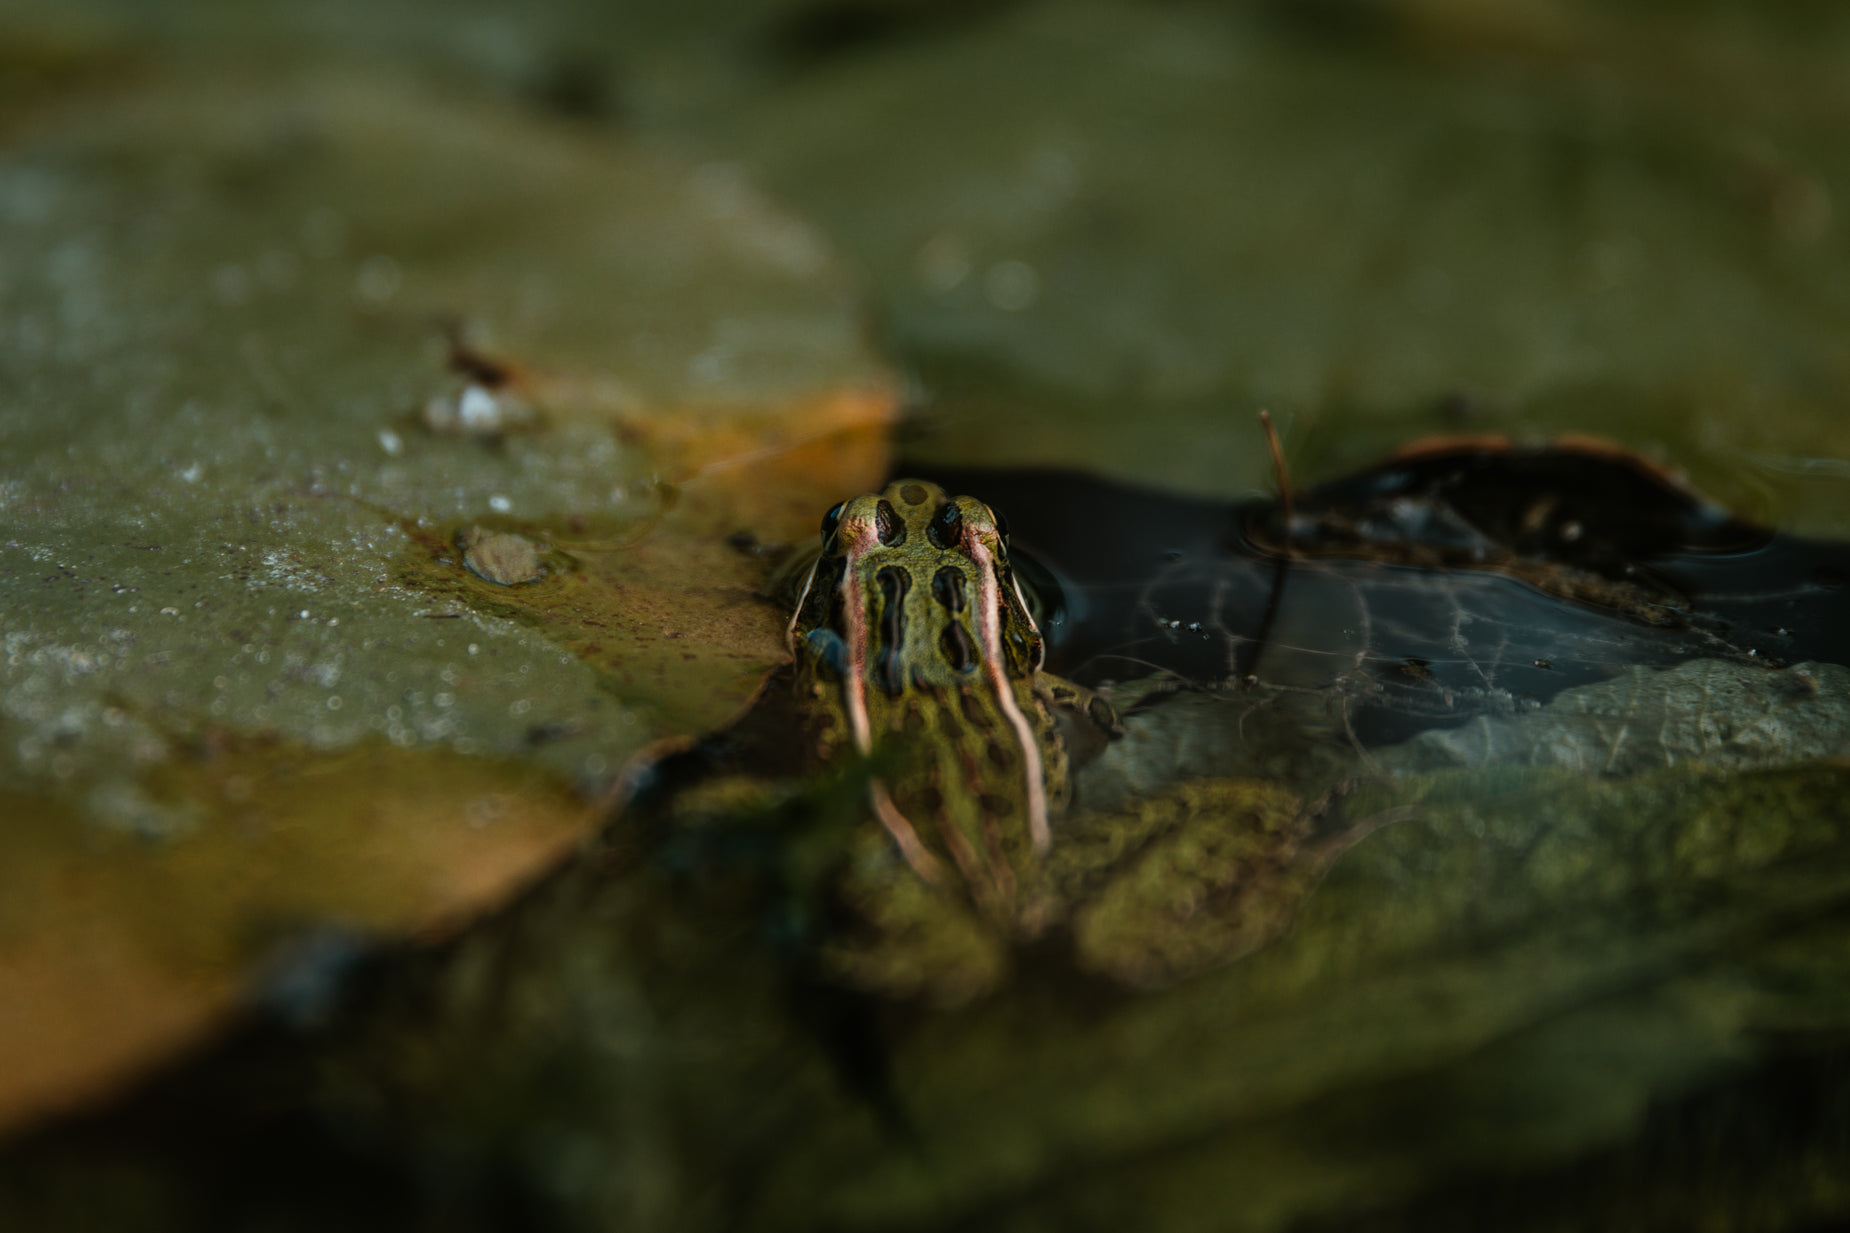 a bug is sitting on the leaves in the water